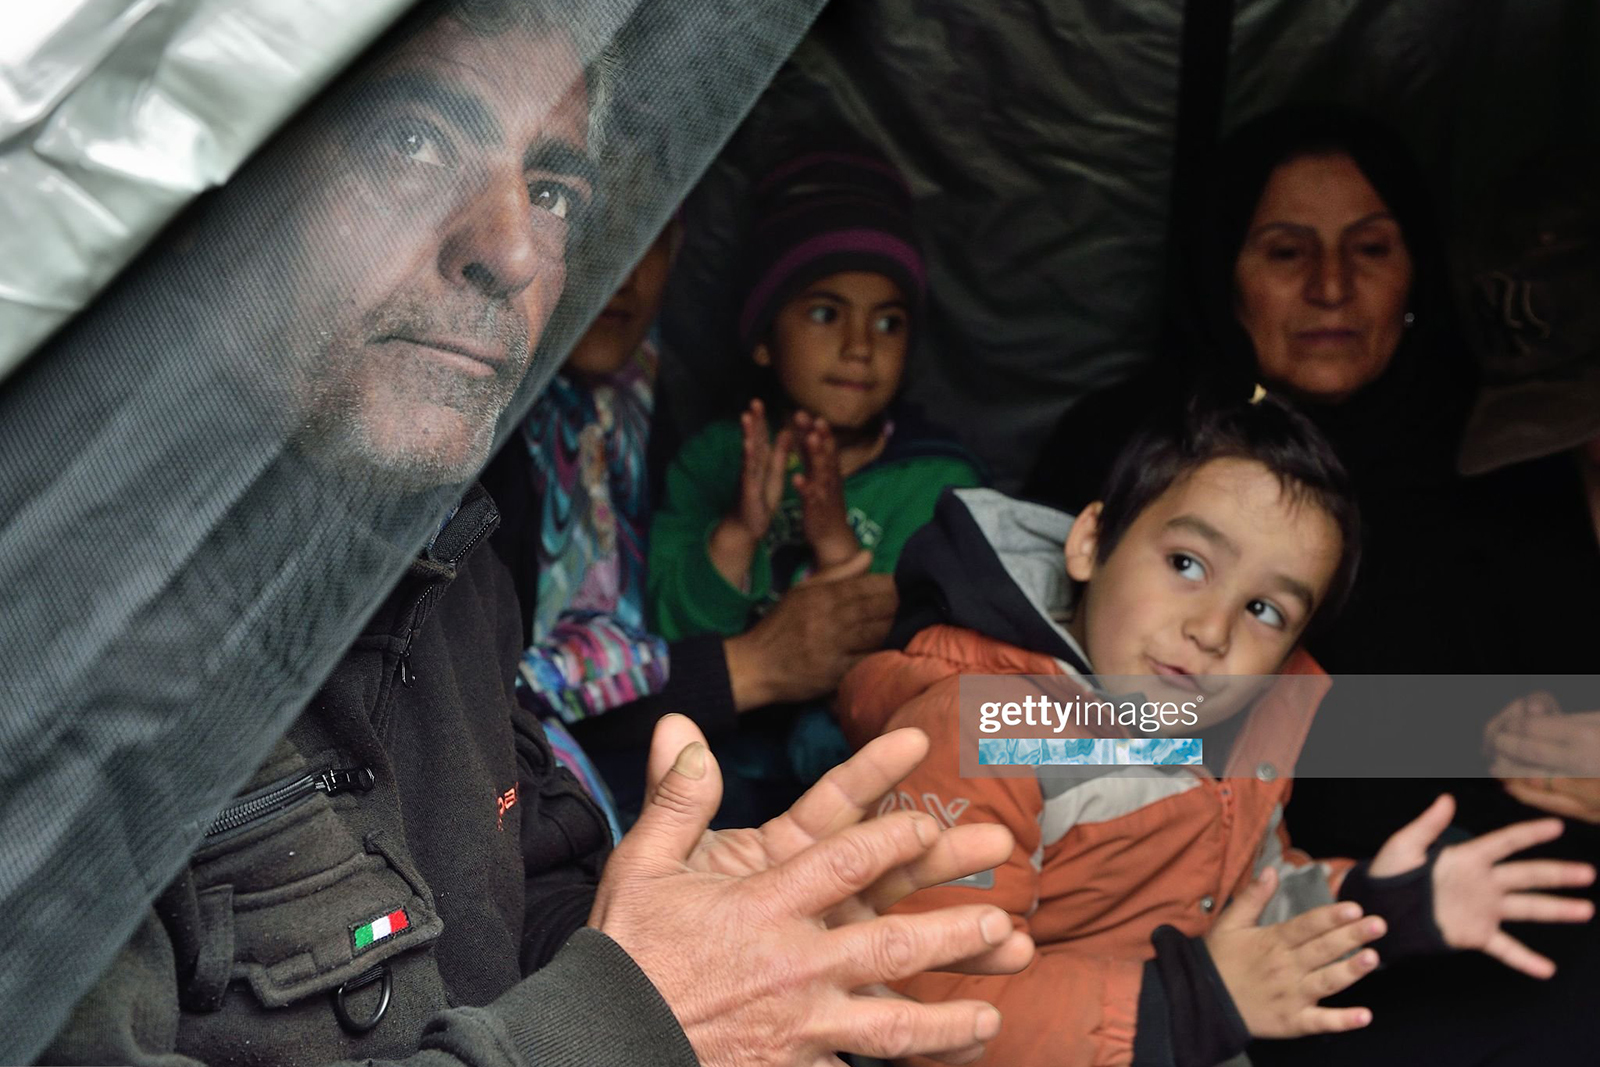 A Kurdish refugee family plays traditional music inside their tent at a makeshift camp at the Greek-Macedonian border, near the Greek village of Idomeni on March 16, 2016, where thousands of refugees and migrants are stranded by the Balkan border blockade. / AFP / DANIEL MIHAILESCU        (Photo credit should read DANIEL MIHAILESCU/AFP via Getty Images)